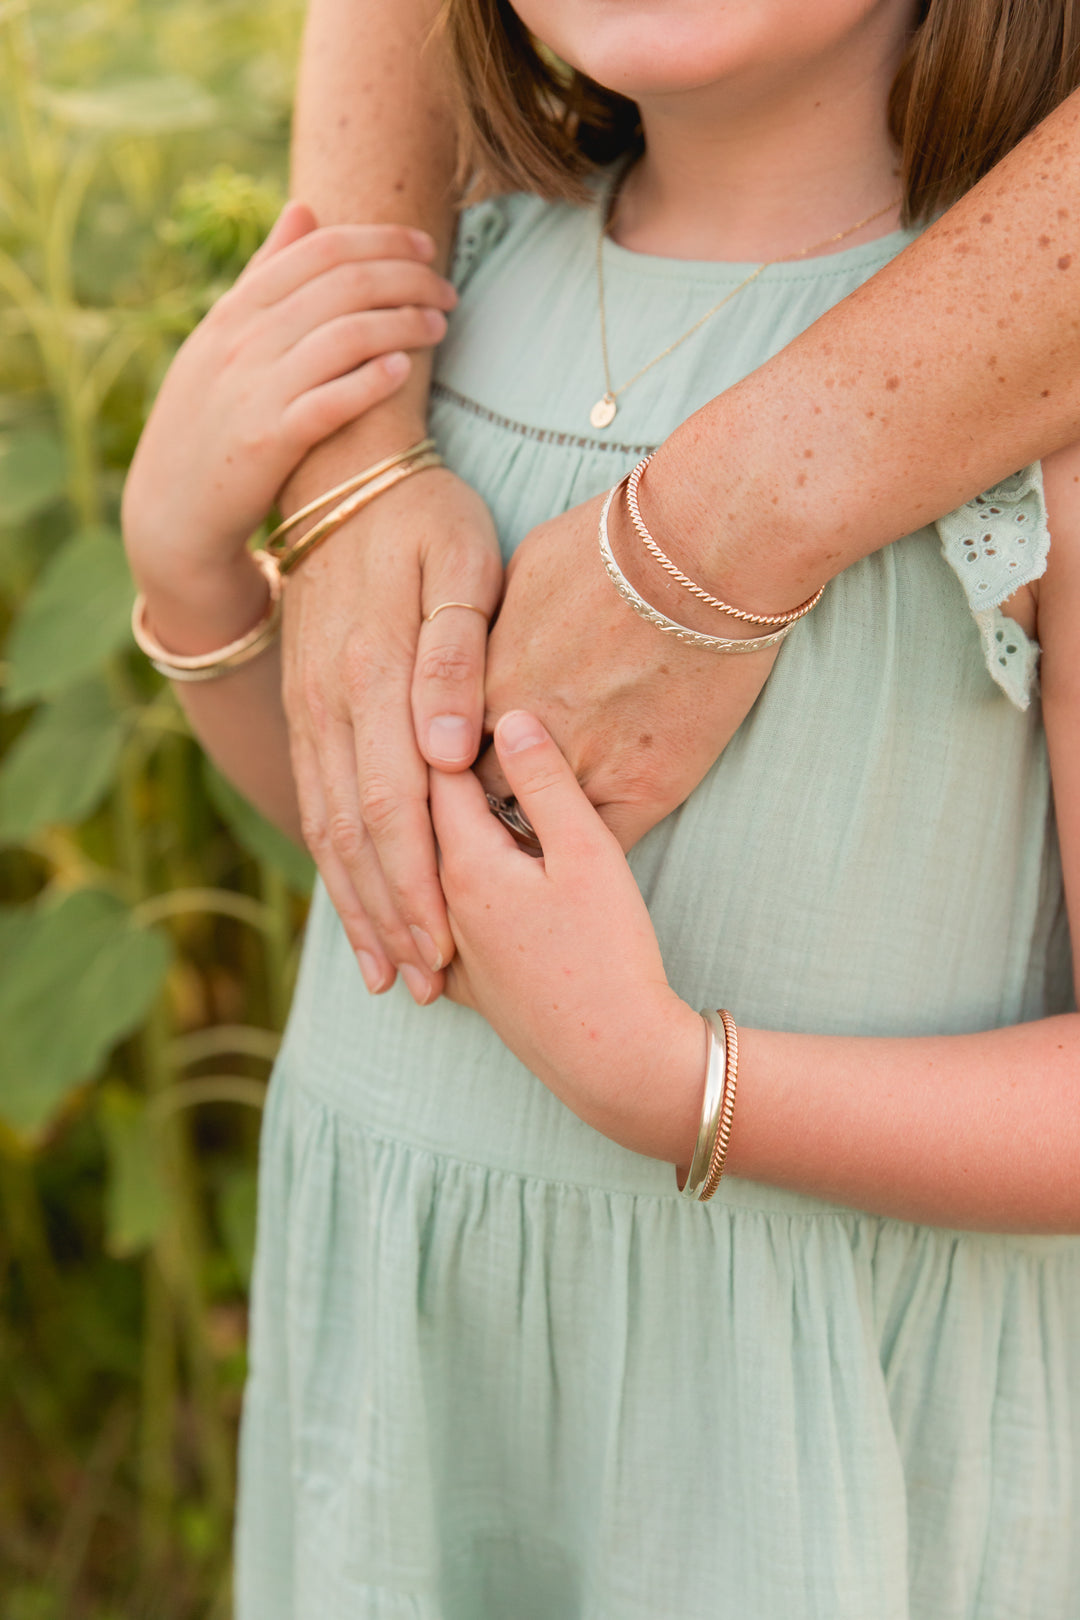 Matching Mommy and Me bracelets by Anna Shae Jewelry in Lexington, Kentucky